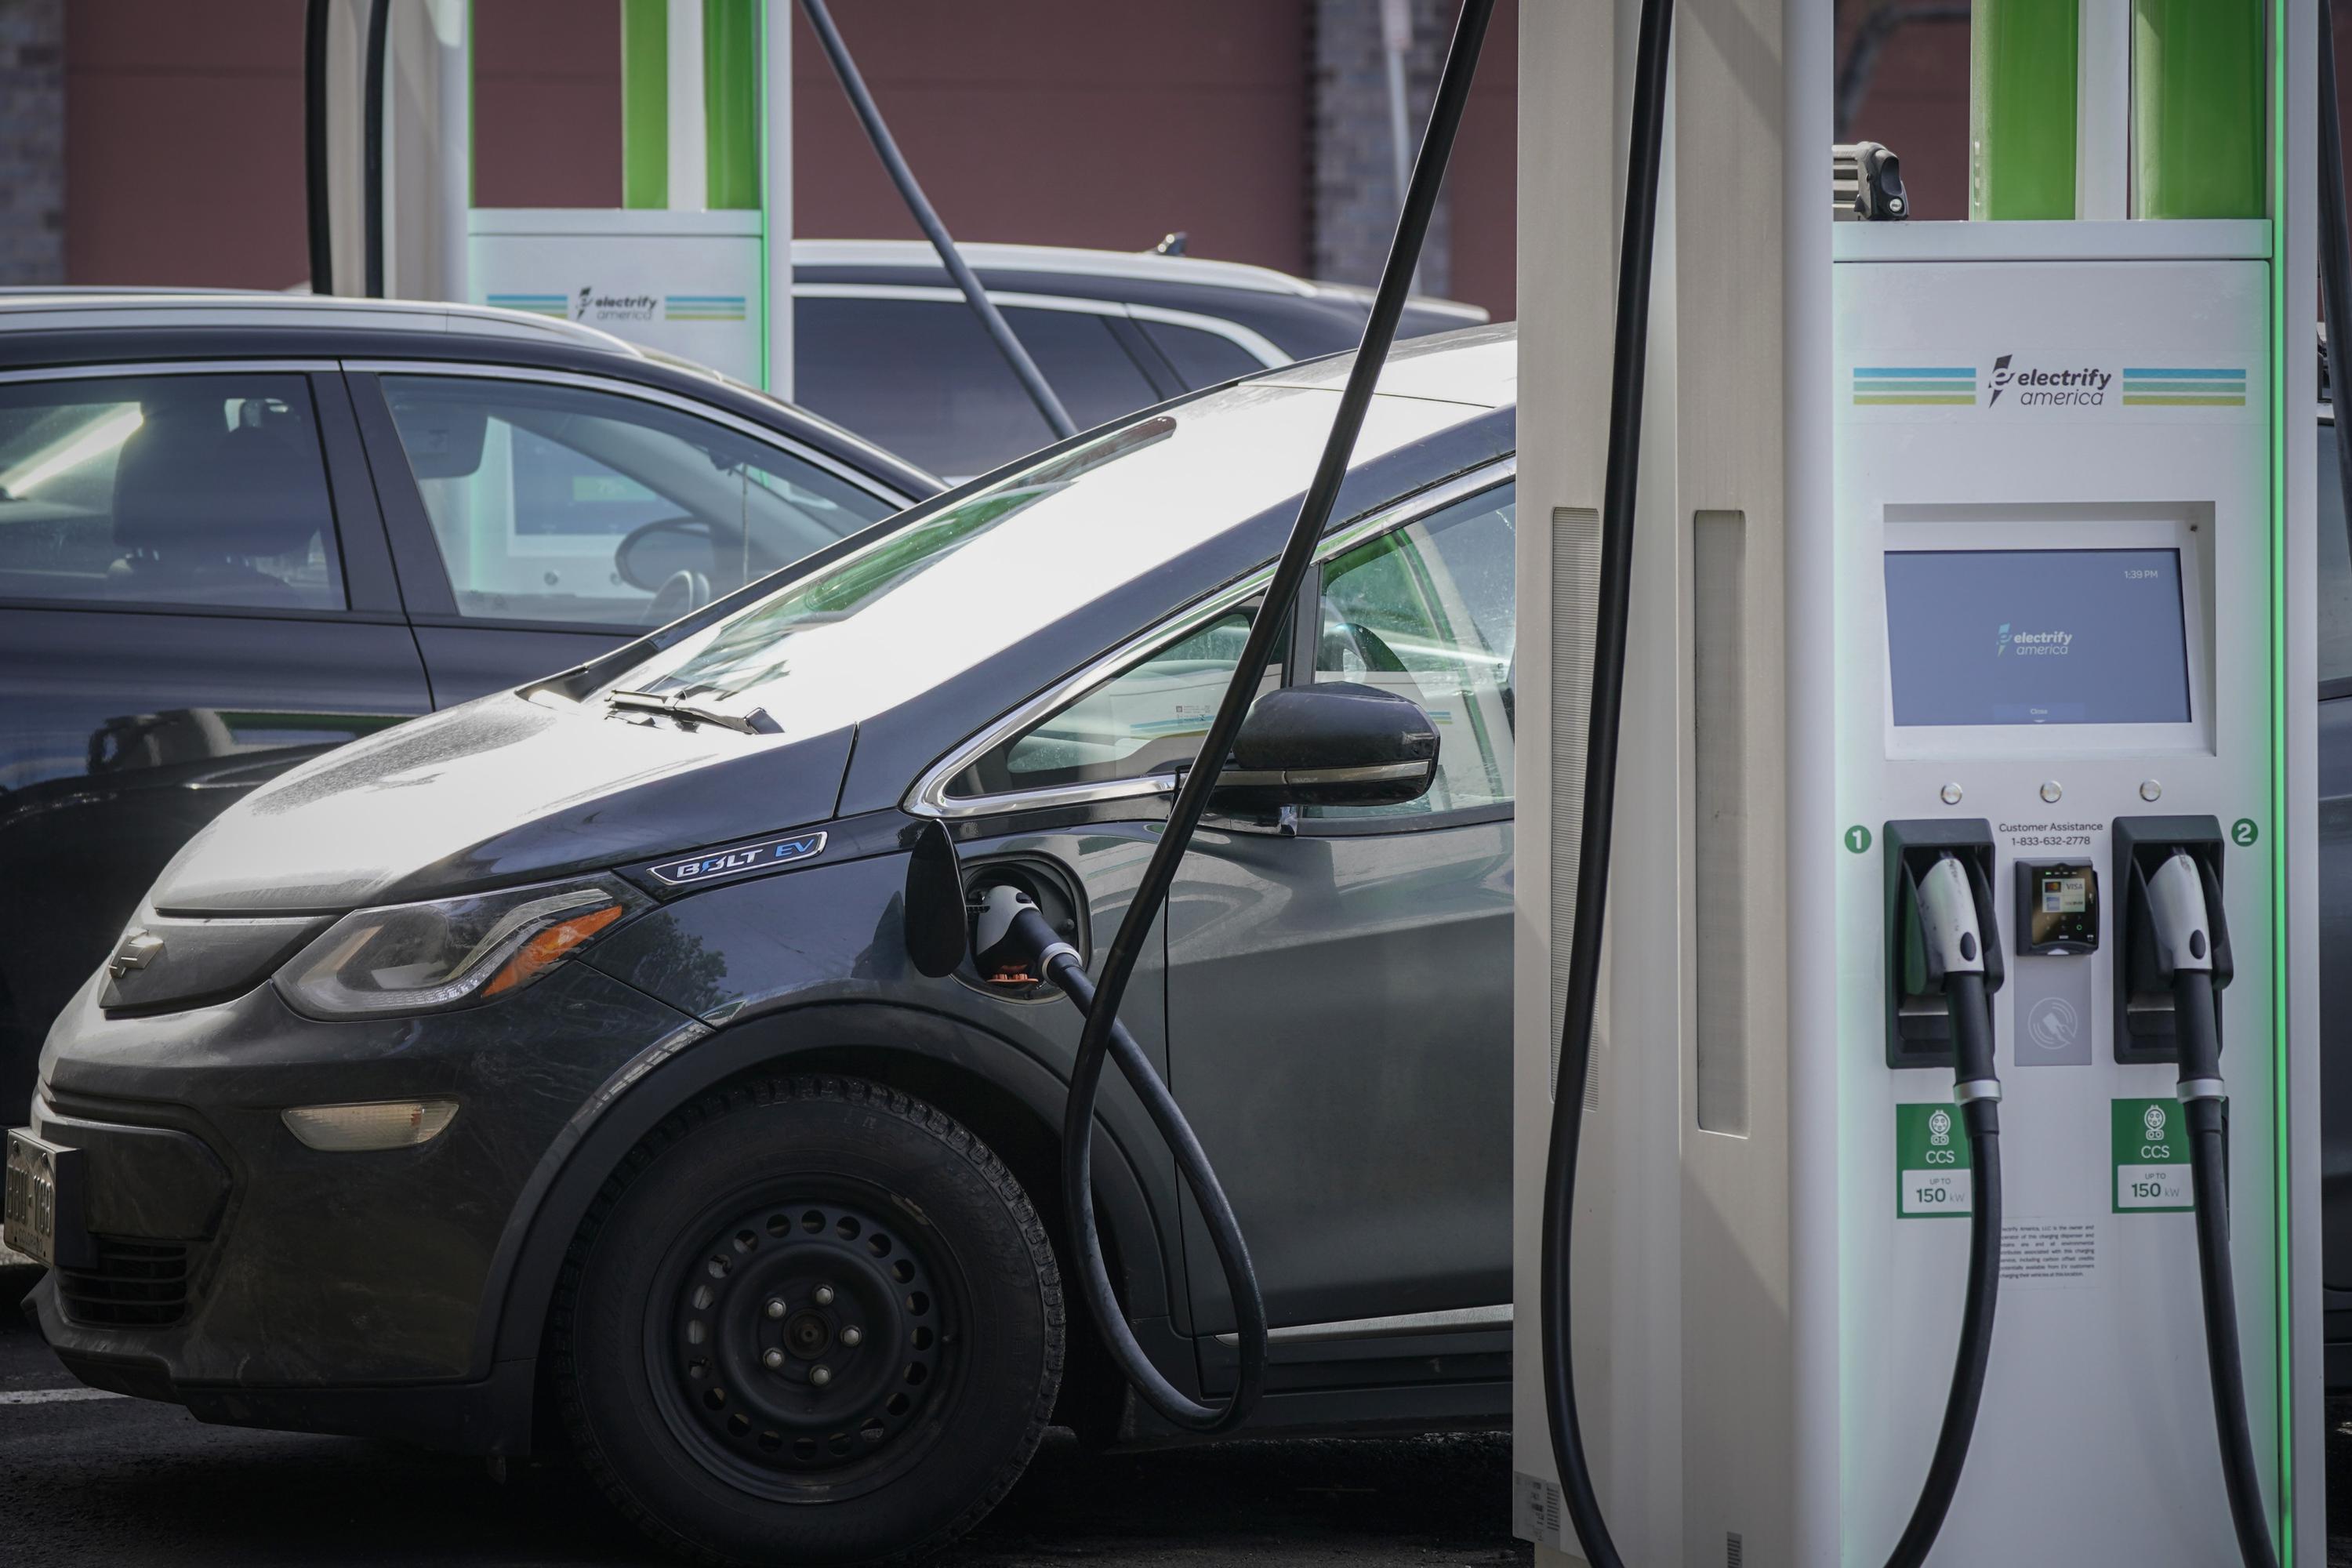 electric-vehicle-rebate-available-until-3-31-mcleod-cooperative-power